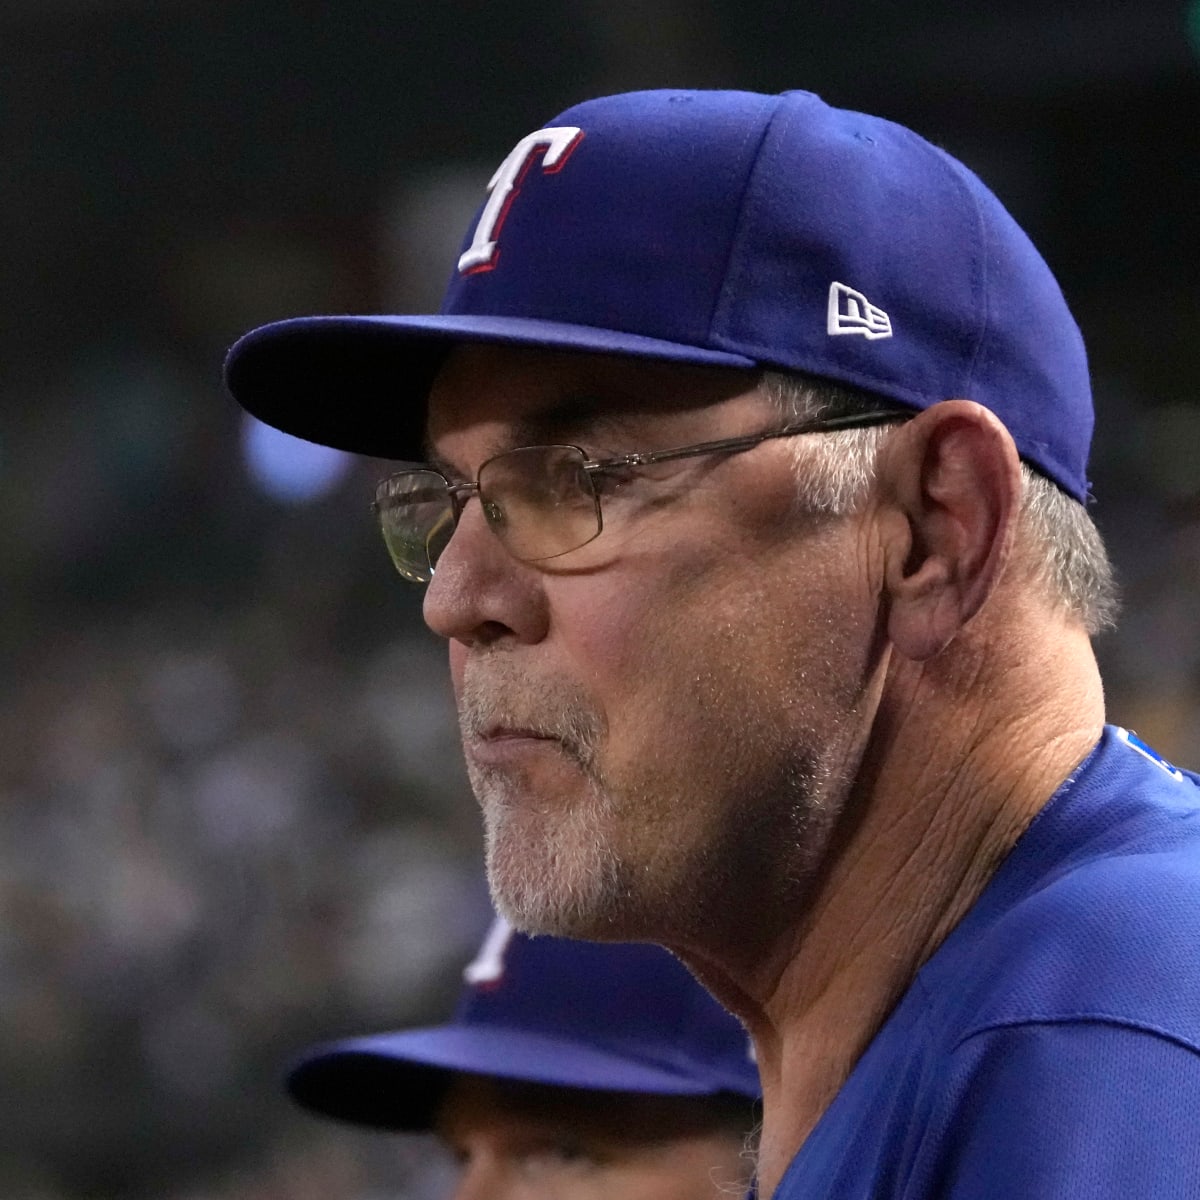 Texas Rangers manager staying positive as losses mount